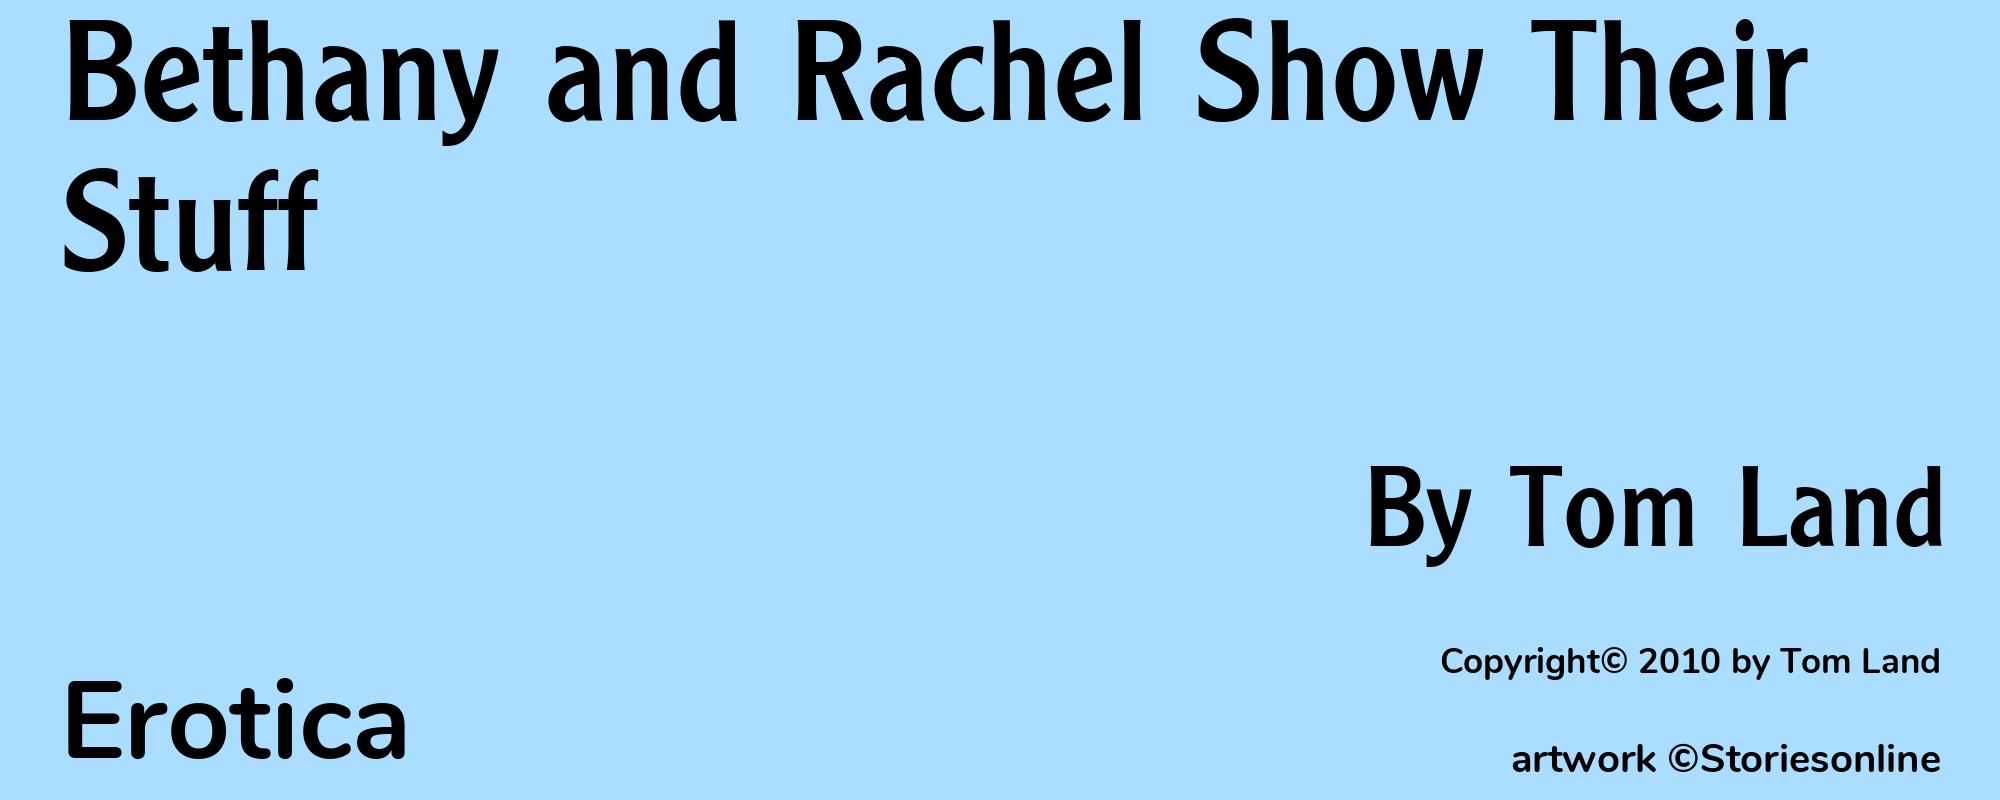 Bethany and Rachel Show Their Stuff - Cover